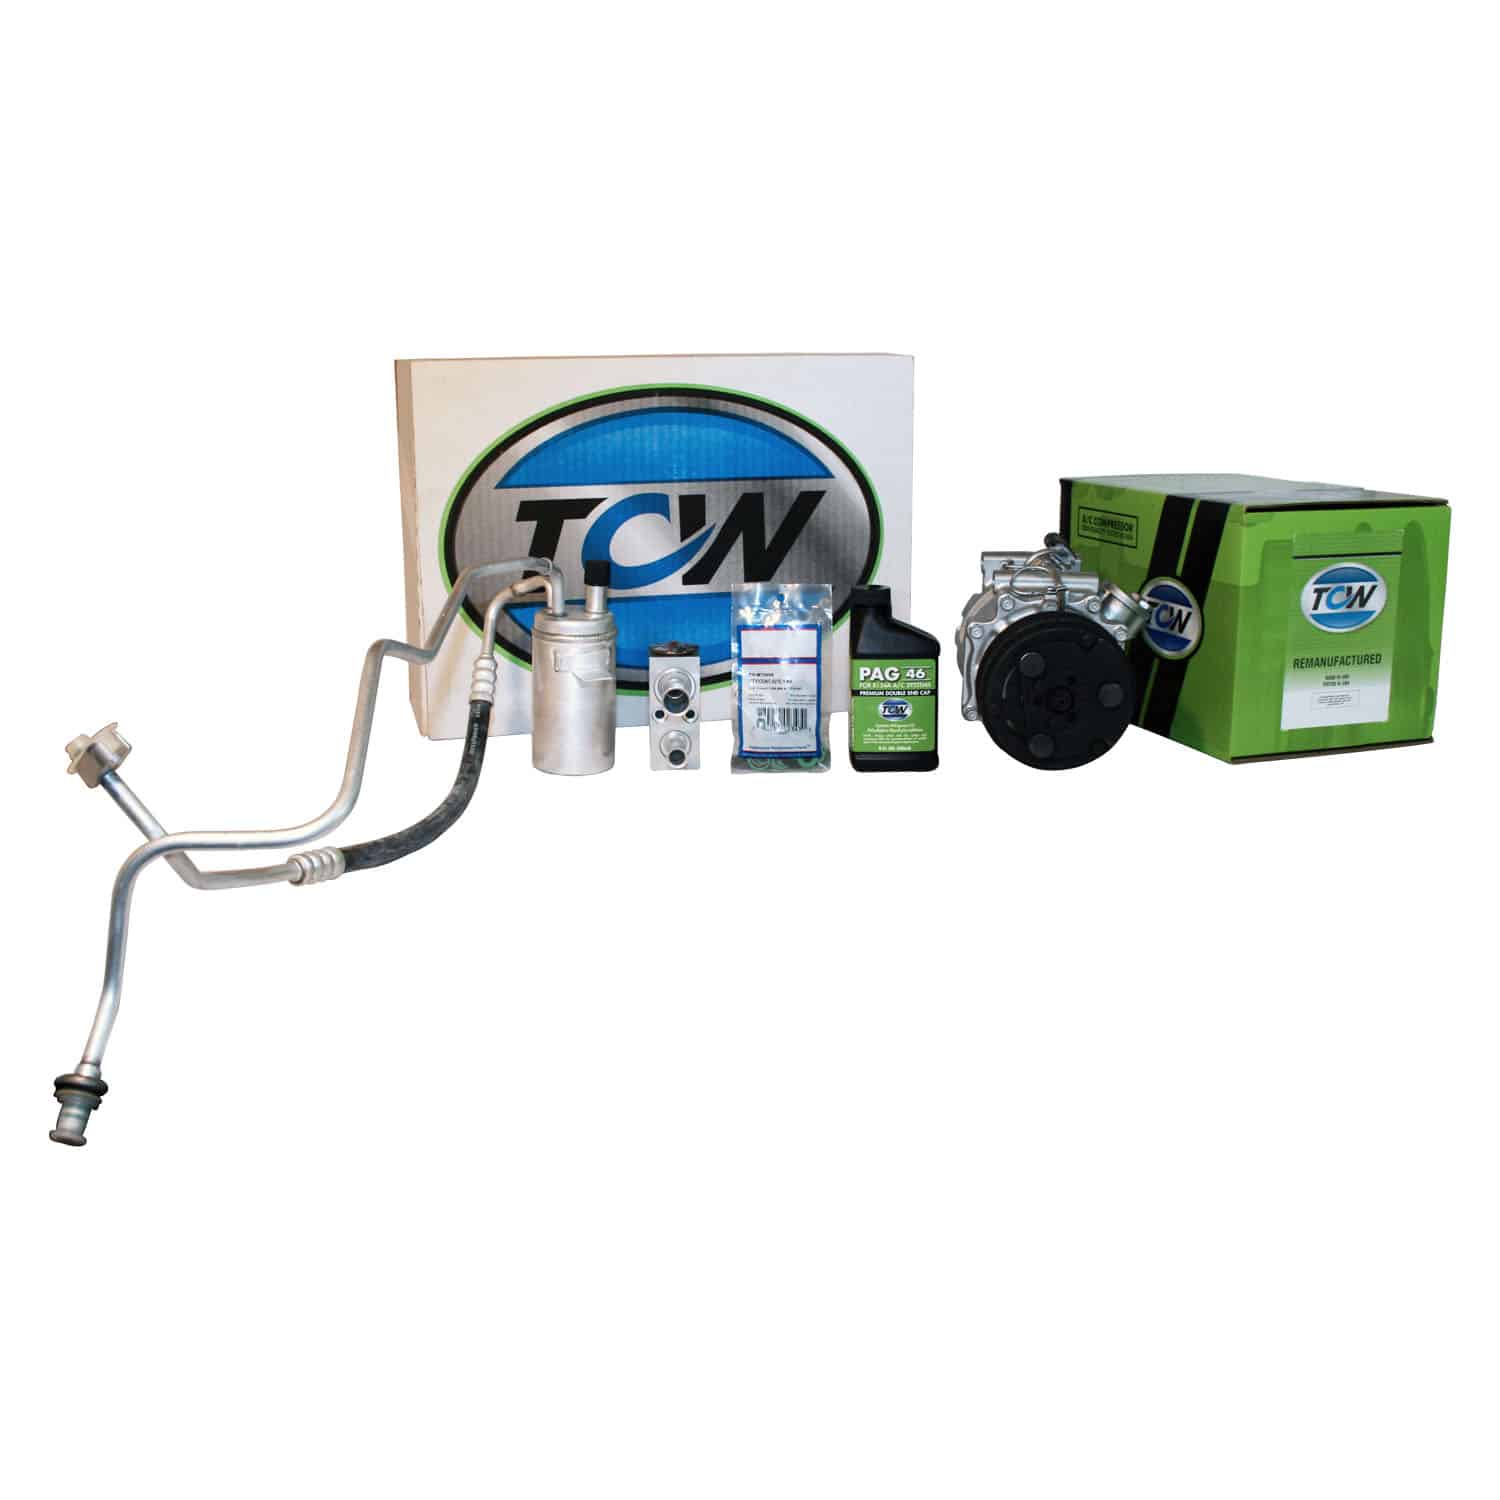 TCW Vehicle A/C Kit K1000468R Remanufactured Product Image field_60b6a13a6e67c